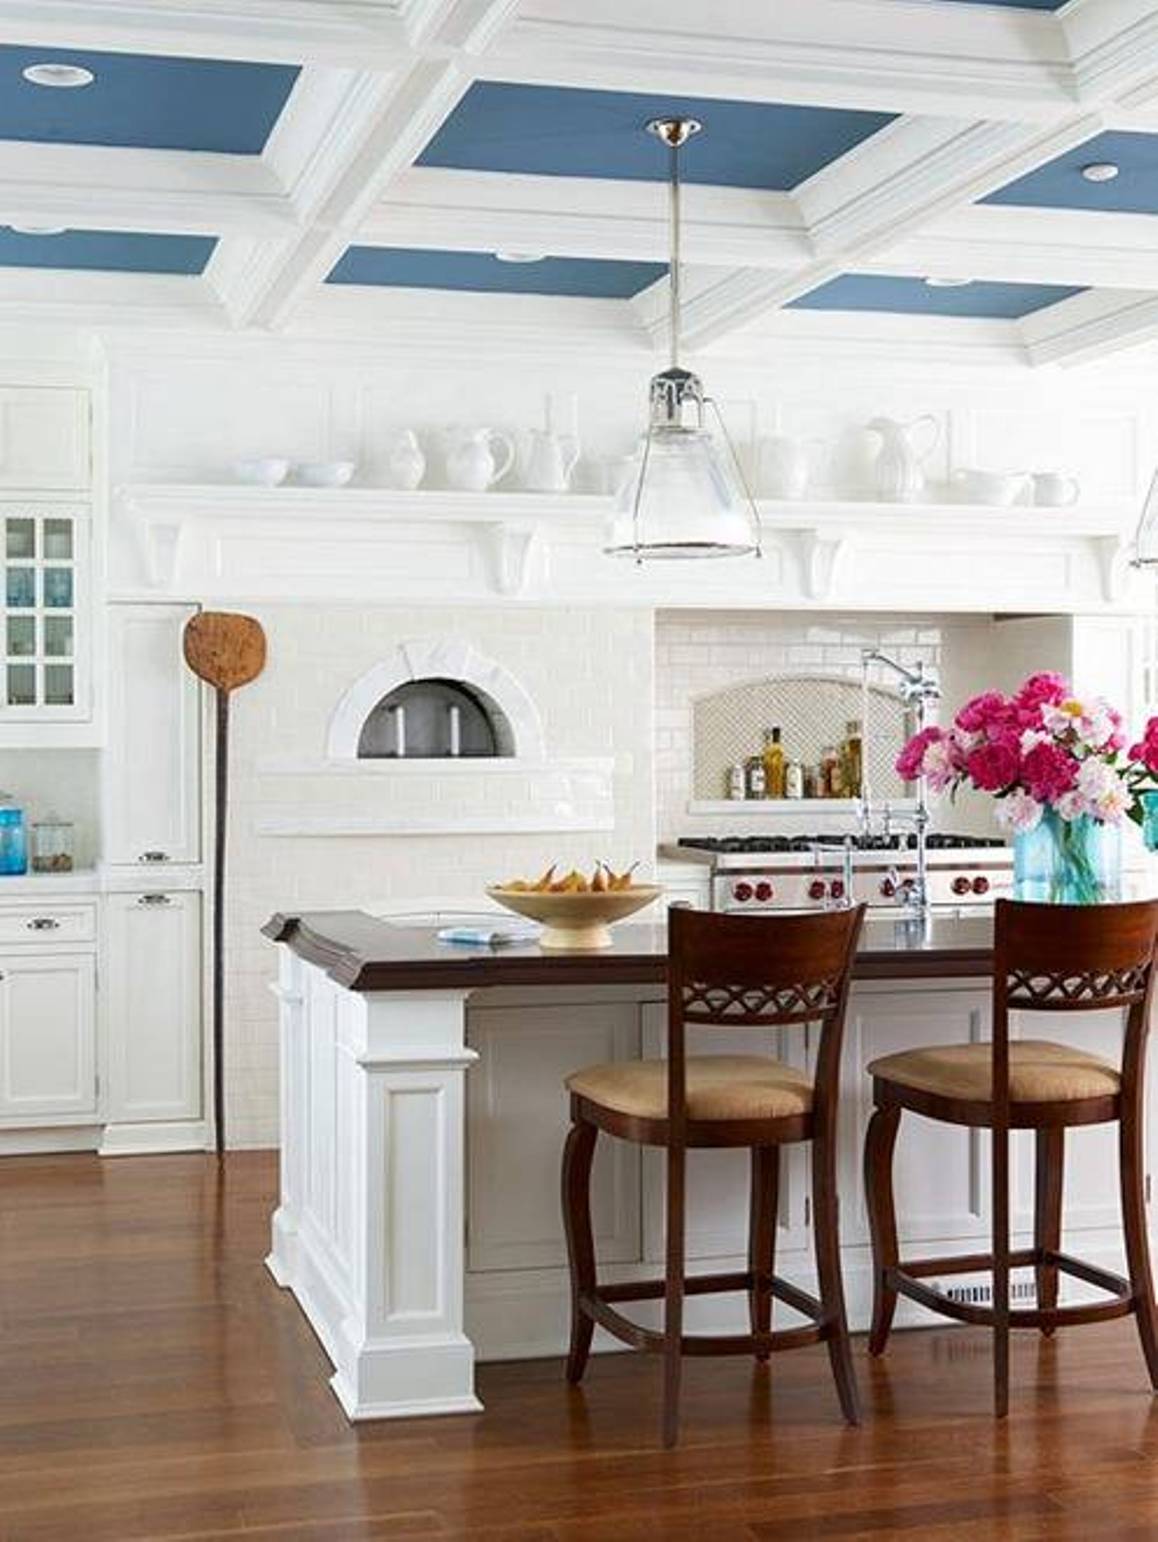 Ceiling Designs For Homes Kitchen 